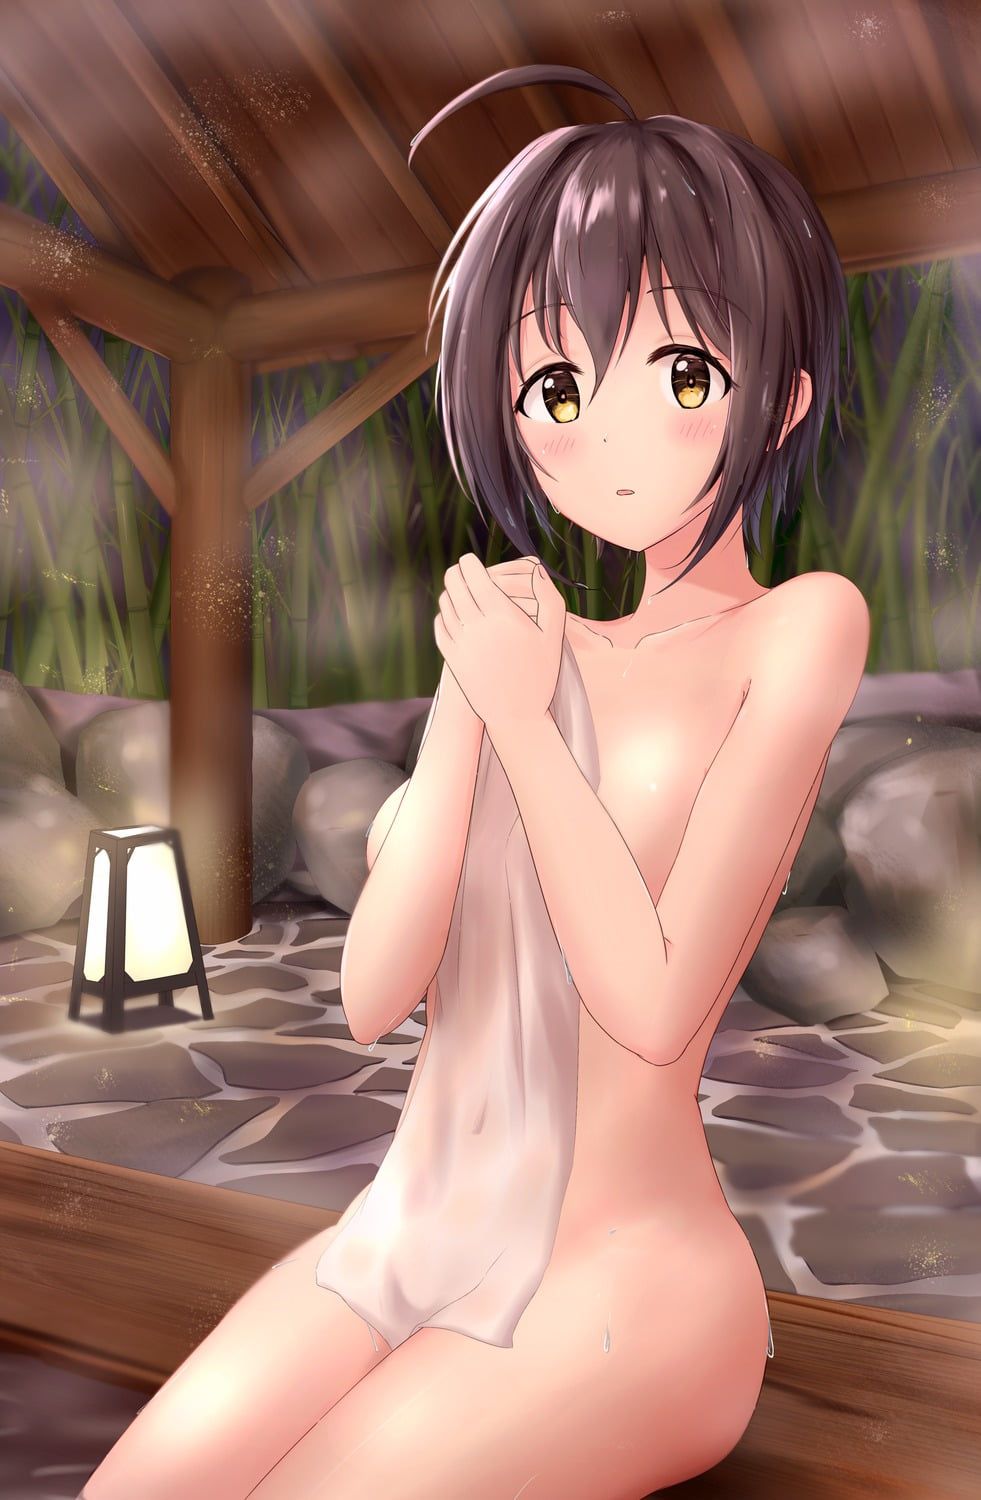 It's a bath, so it's natural to relax naked! It's not ecchi! 20